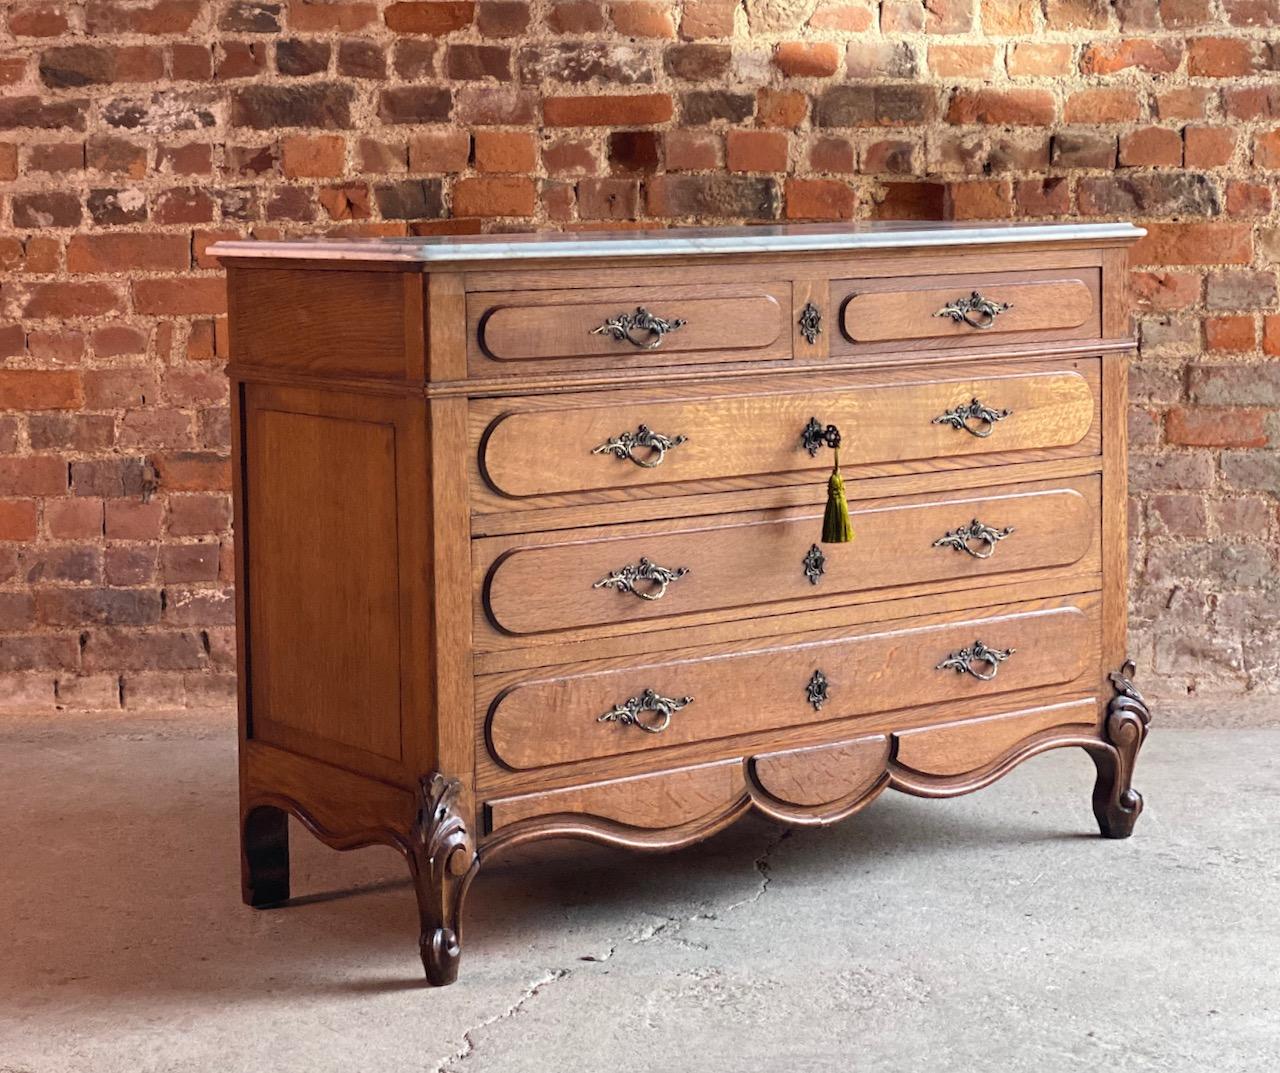 Antique French marble chest of drawers commode, France, circa 1890

Beautiful French antique marble topped oak commode chest of drawers, circa 1890, this chest dates to the late 19th century, the elegant white marble top over two short and three